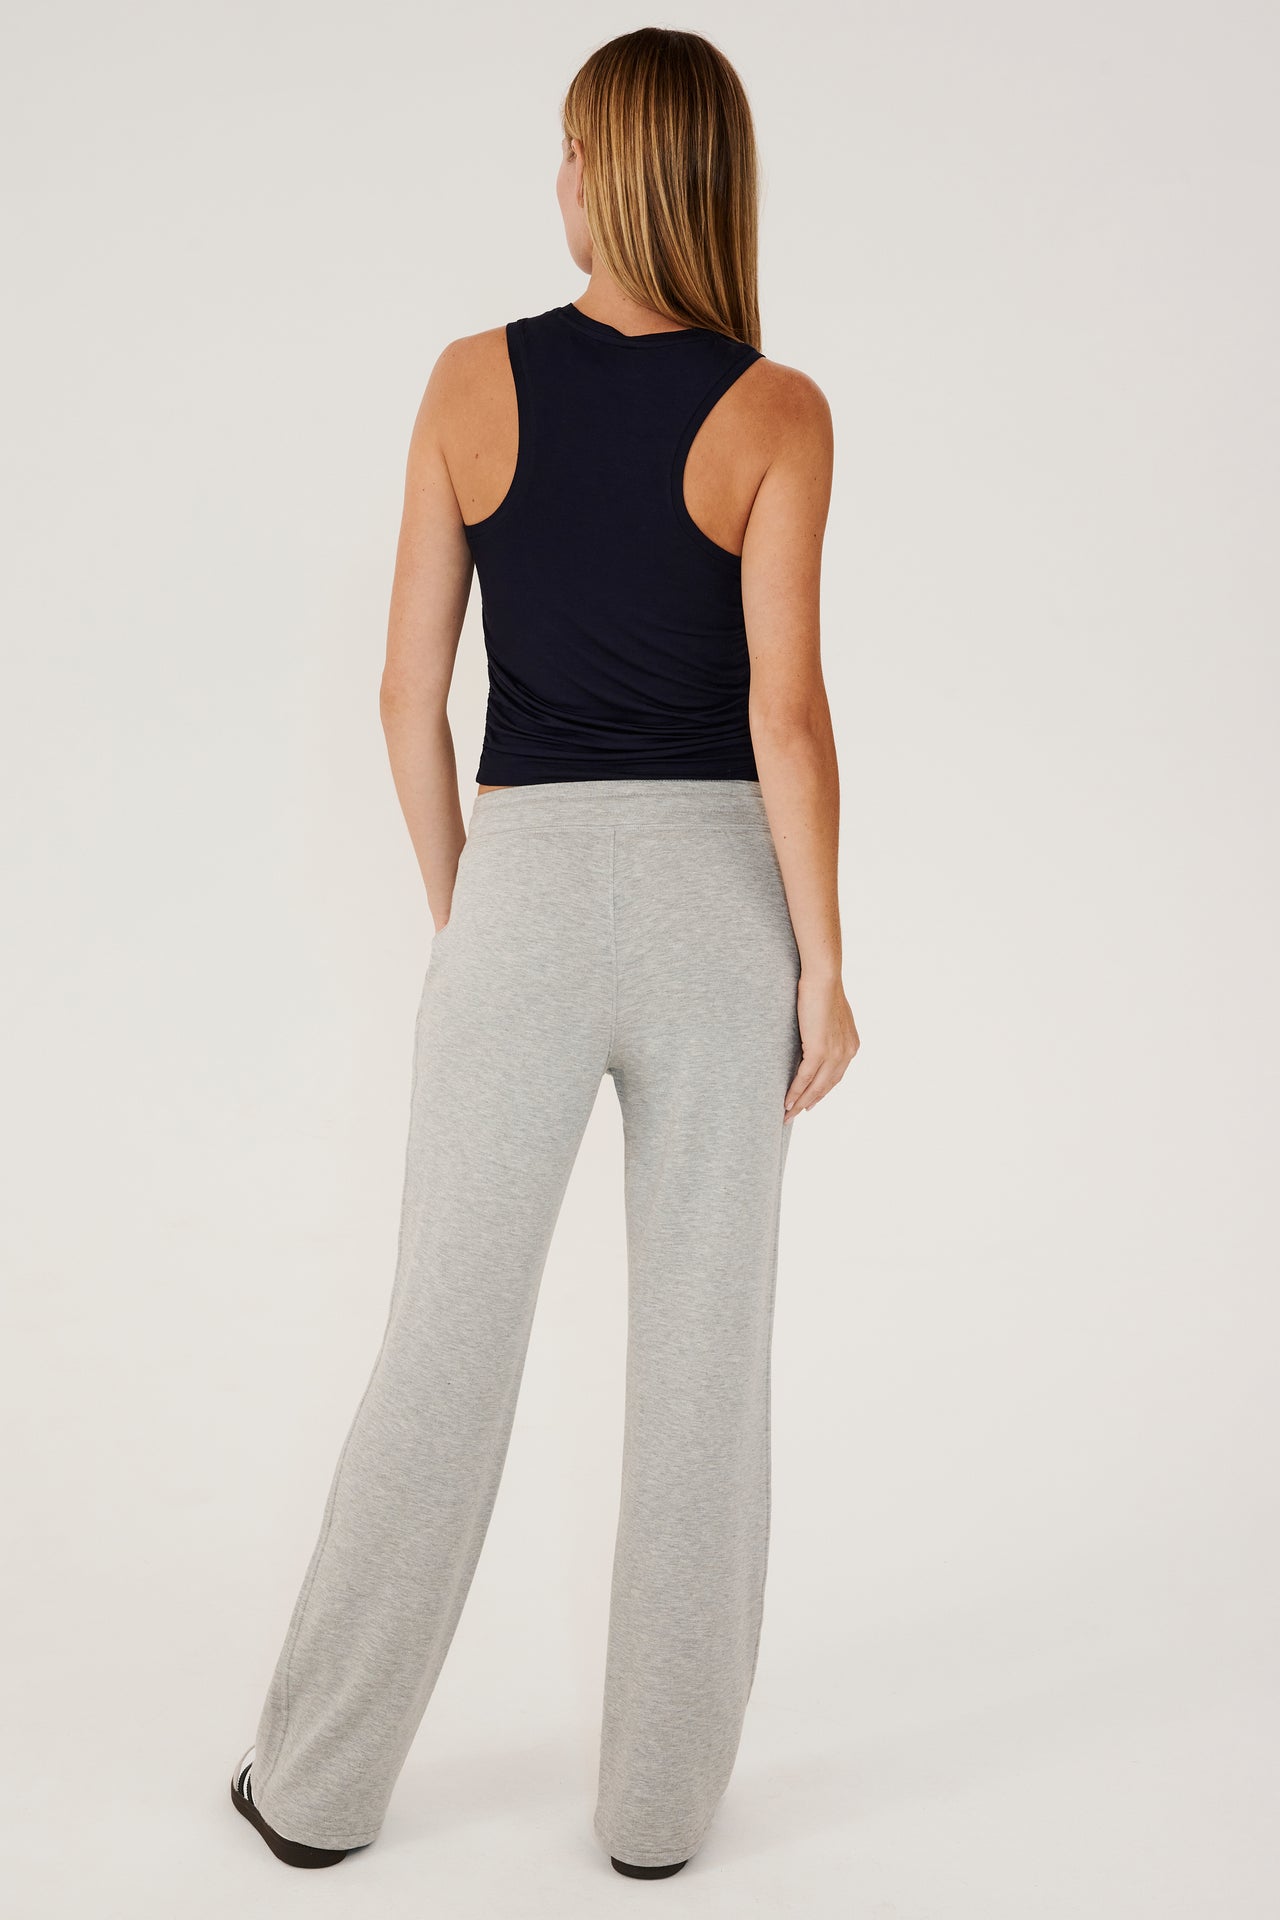 Full back view of woman with straight blonde hair wearing a light gray high rise wide leg relaxed fit sweatpant with side pockets. With black  high neckline racer tank top. Paired with white and grey shoes with black stripes.